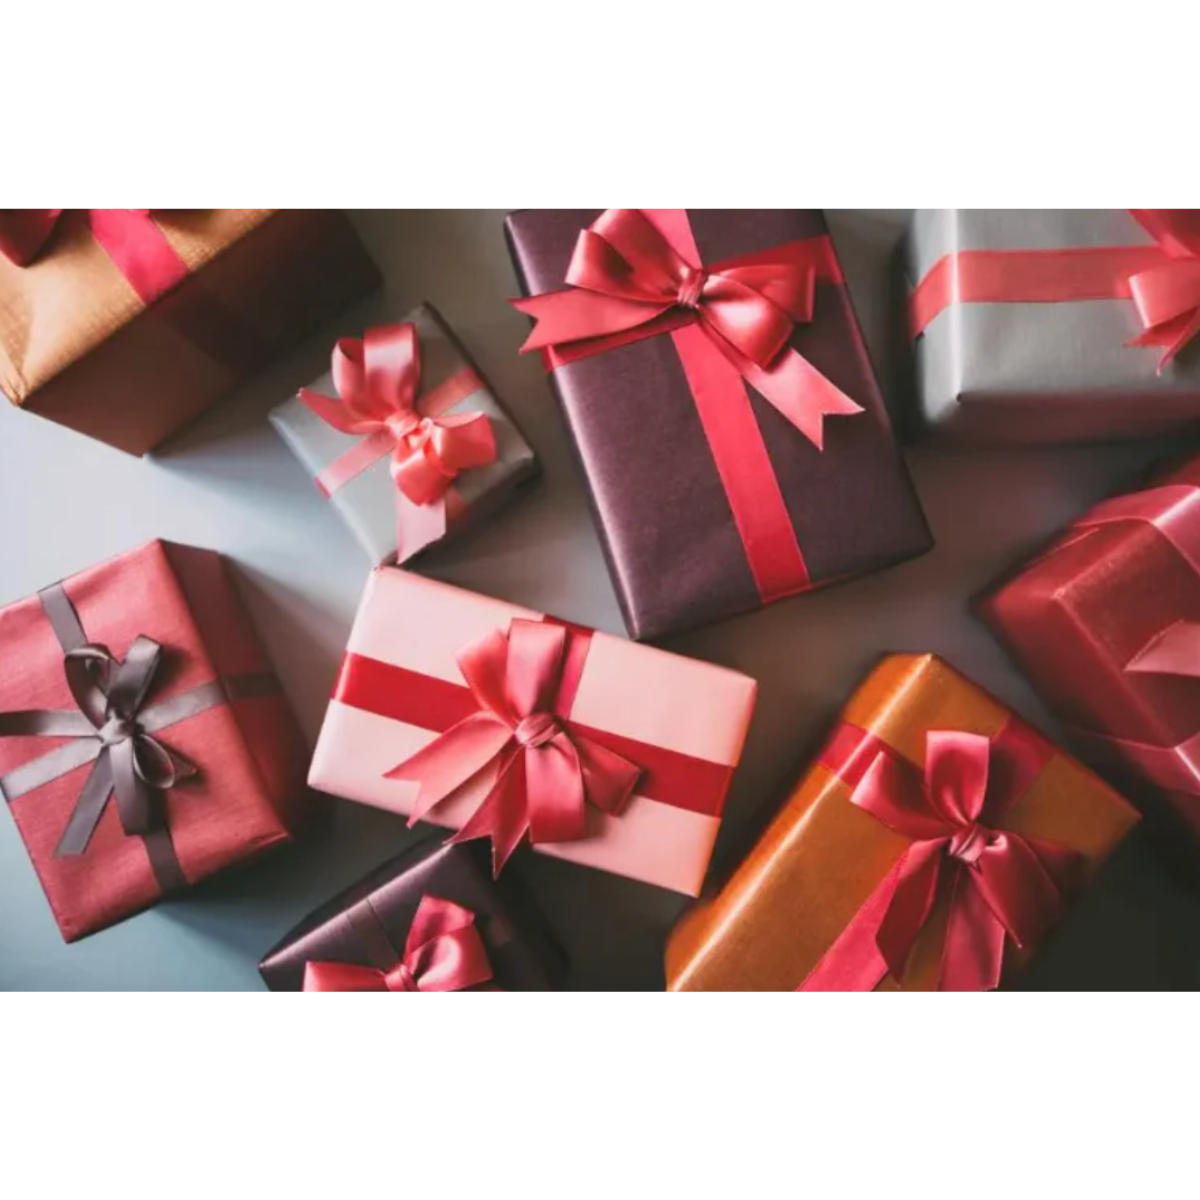 Forbes - Gift Guide: Best Holiday Gifts For The Home Under $100